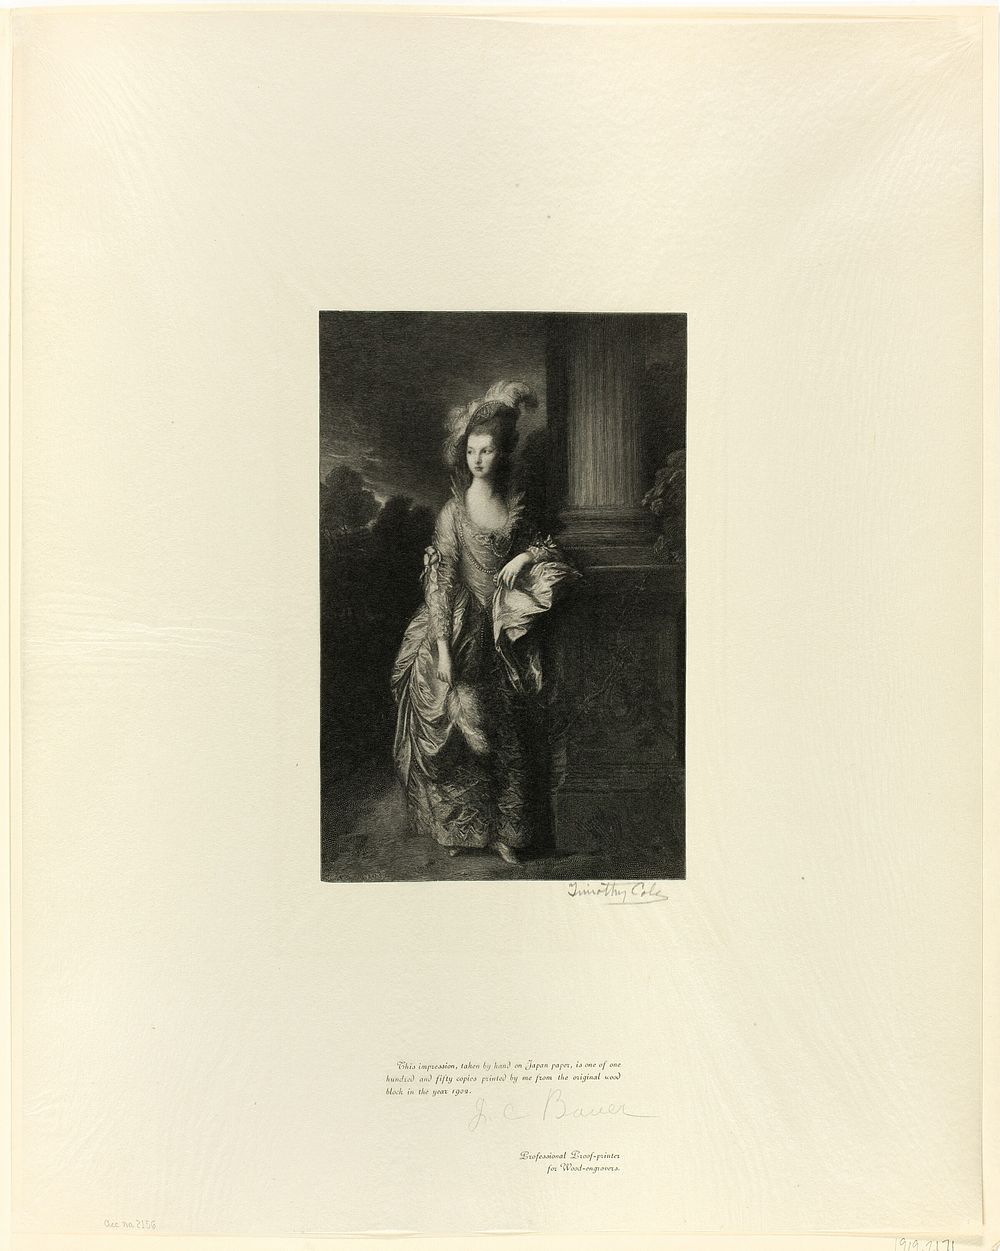 The Honorable Mrs. Graham, from Old English Masters by Timothy Cole